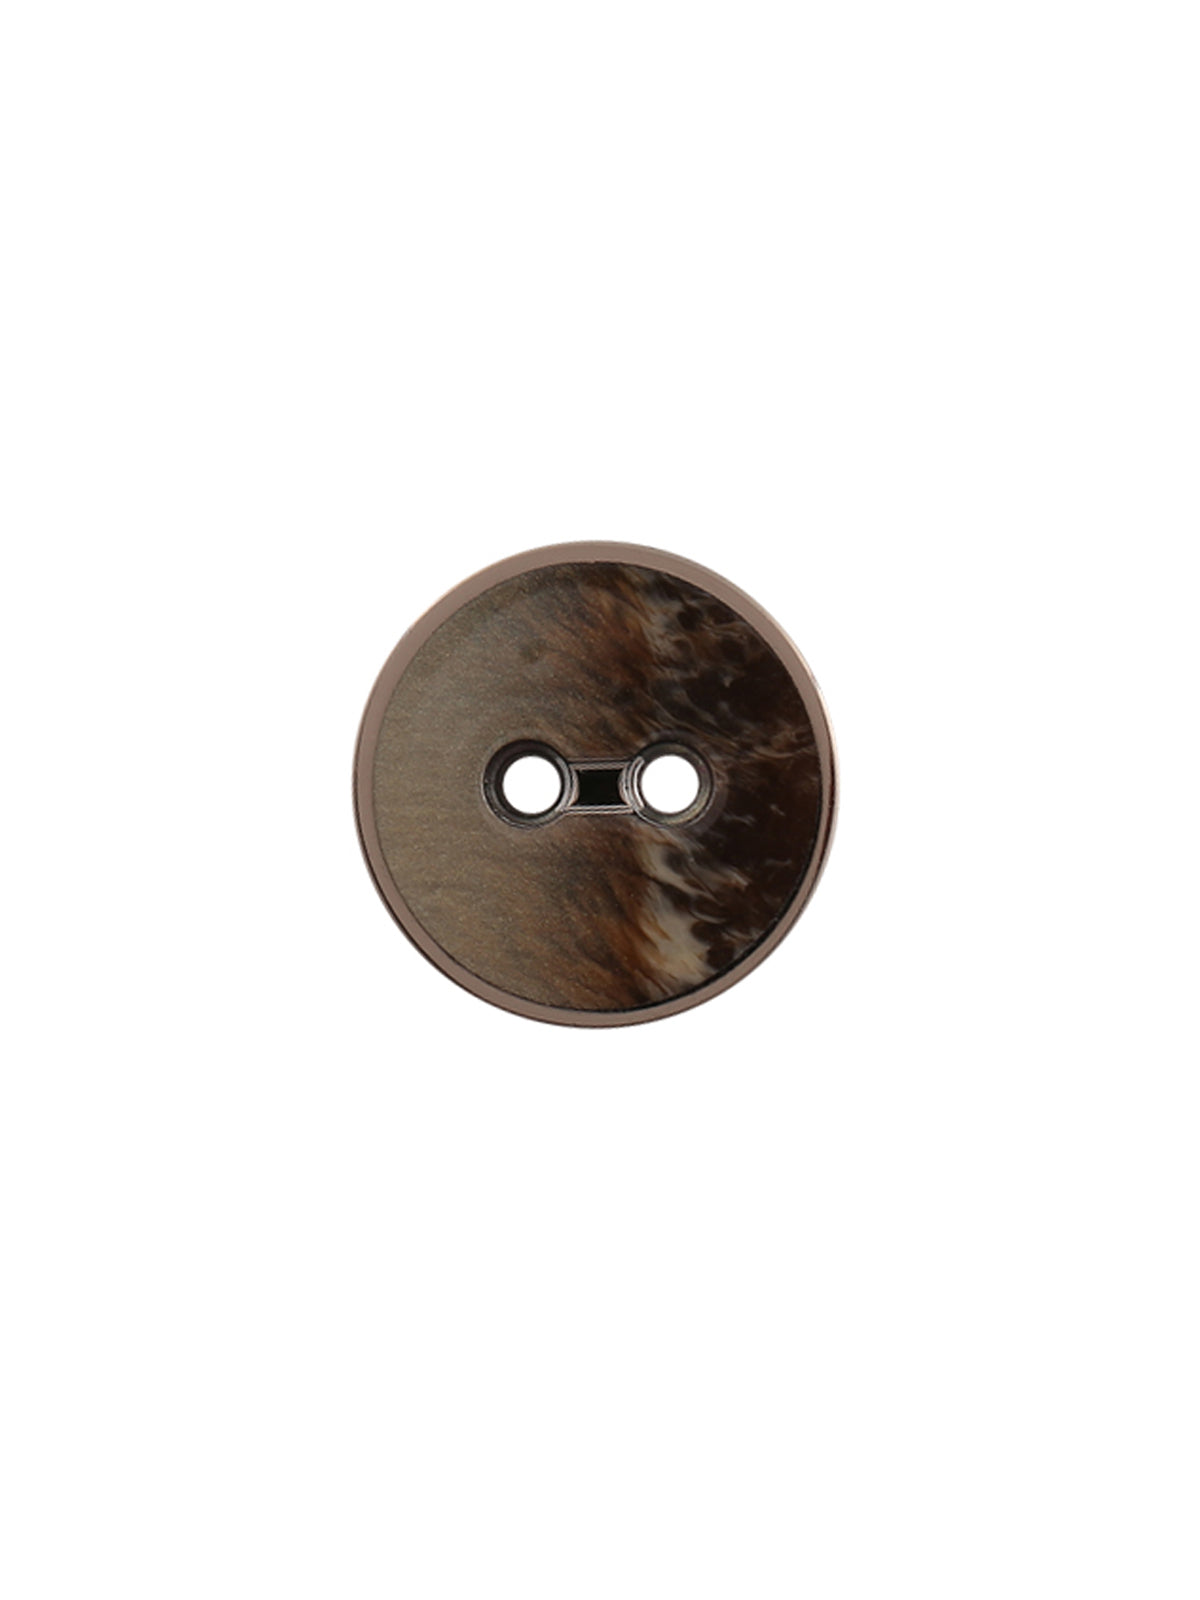 Fancy Round Shape 2-Hole Shiny Poly Brown Color Button